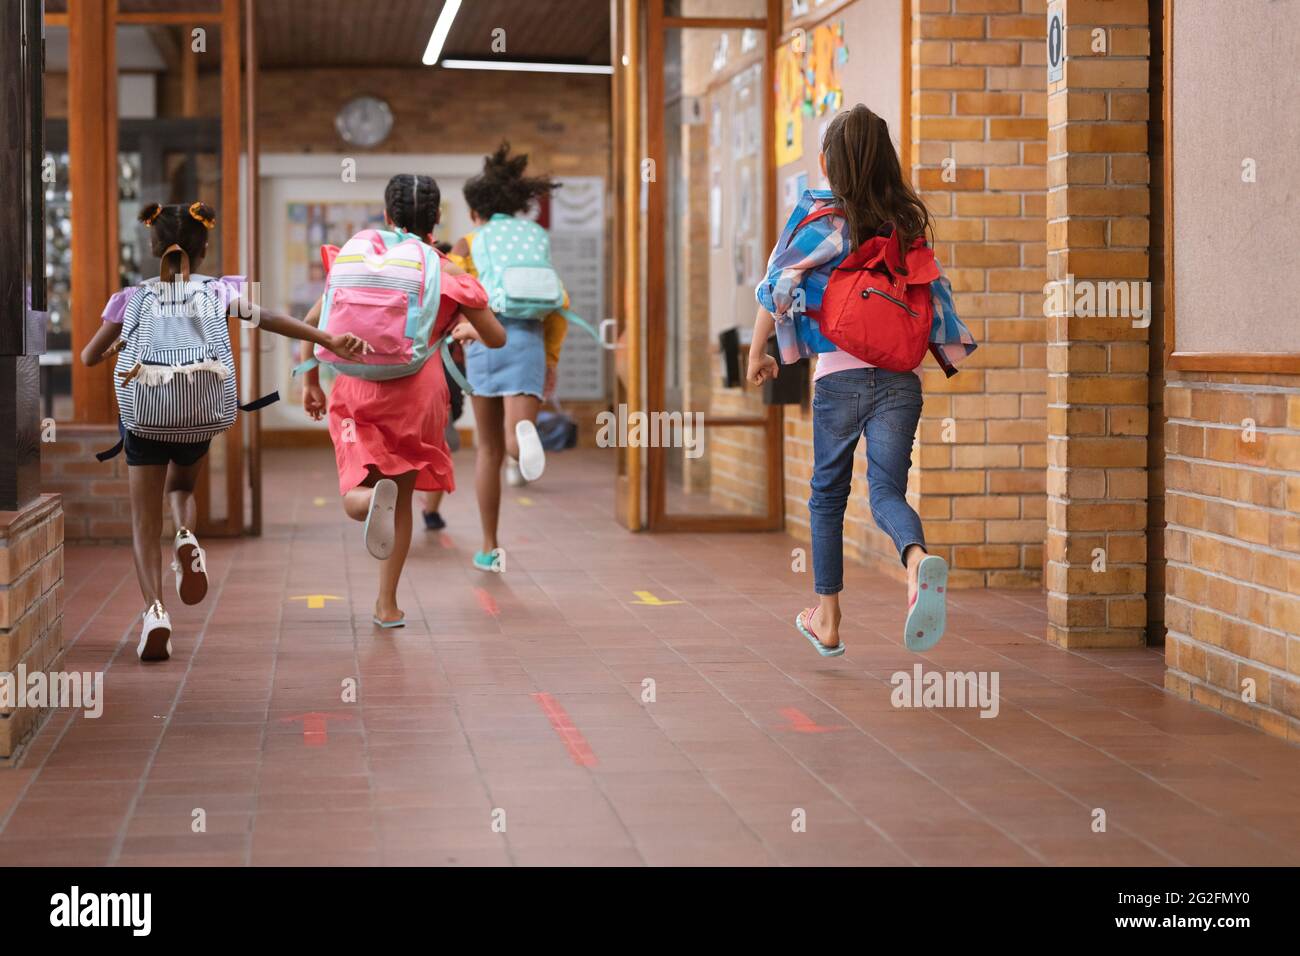 Rear view of group of girls running in the corridor at school Stock Photo